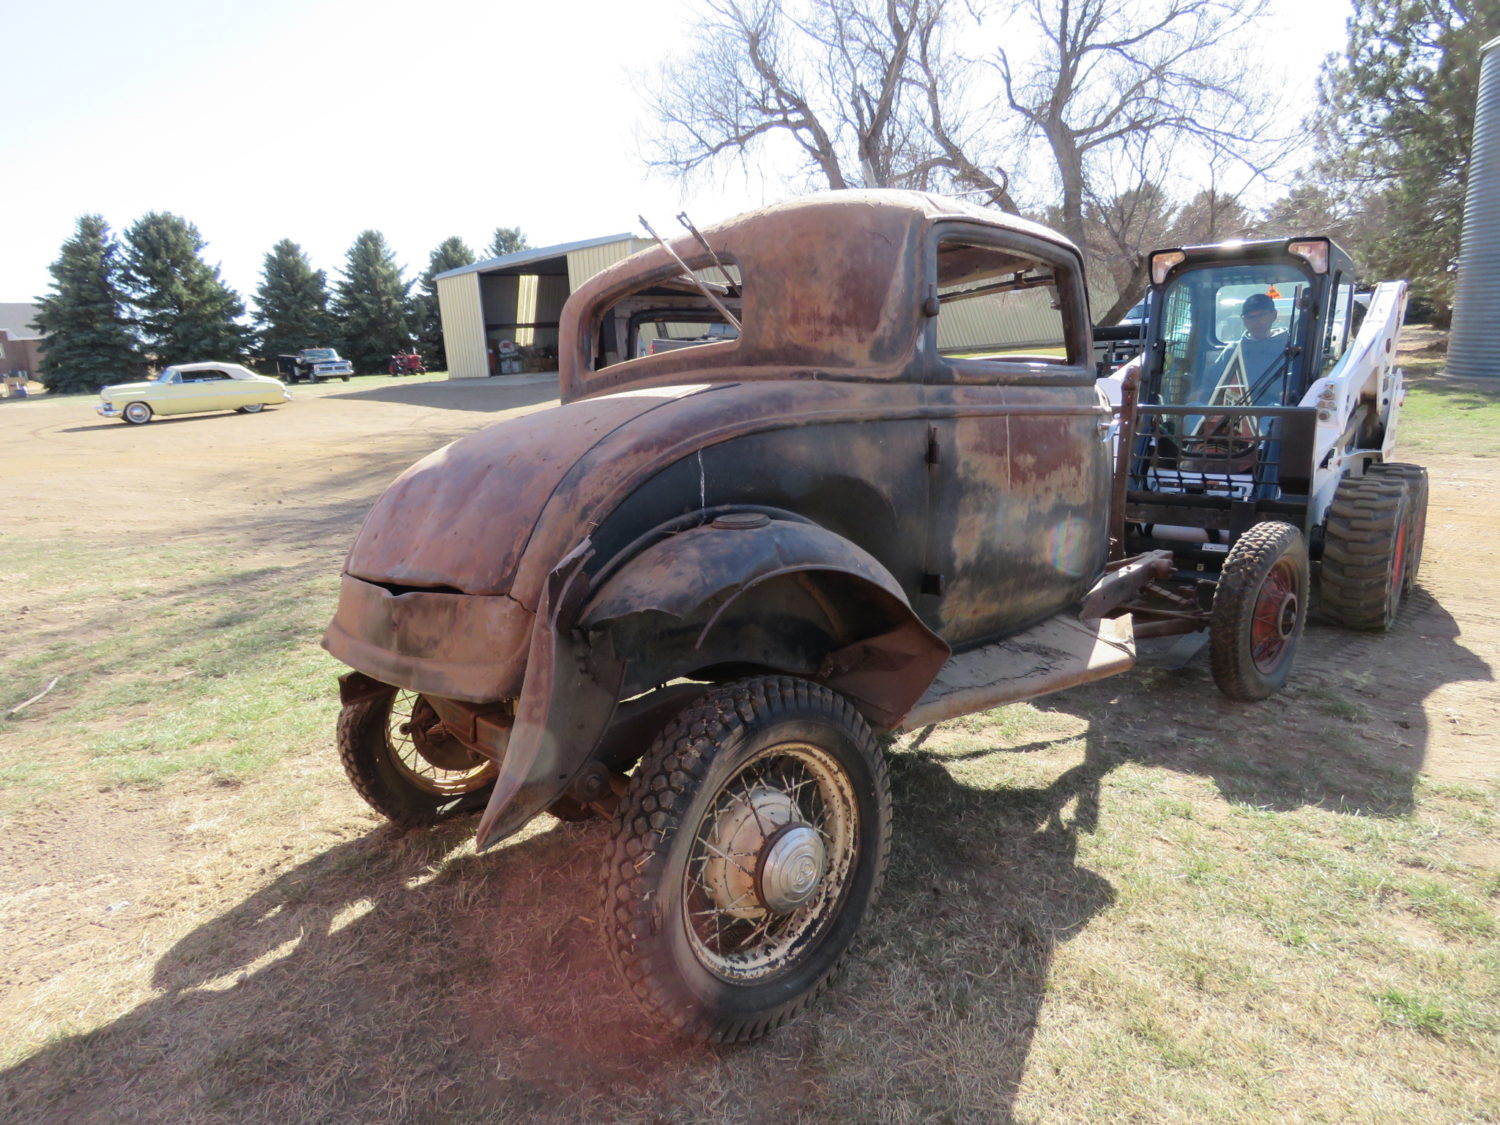 Fabulous Collector Cars, Antique Tractors, Memorabilia & More! The Krinke Collection - image 12